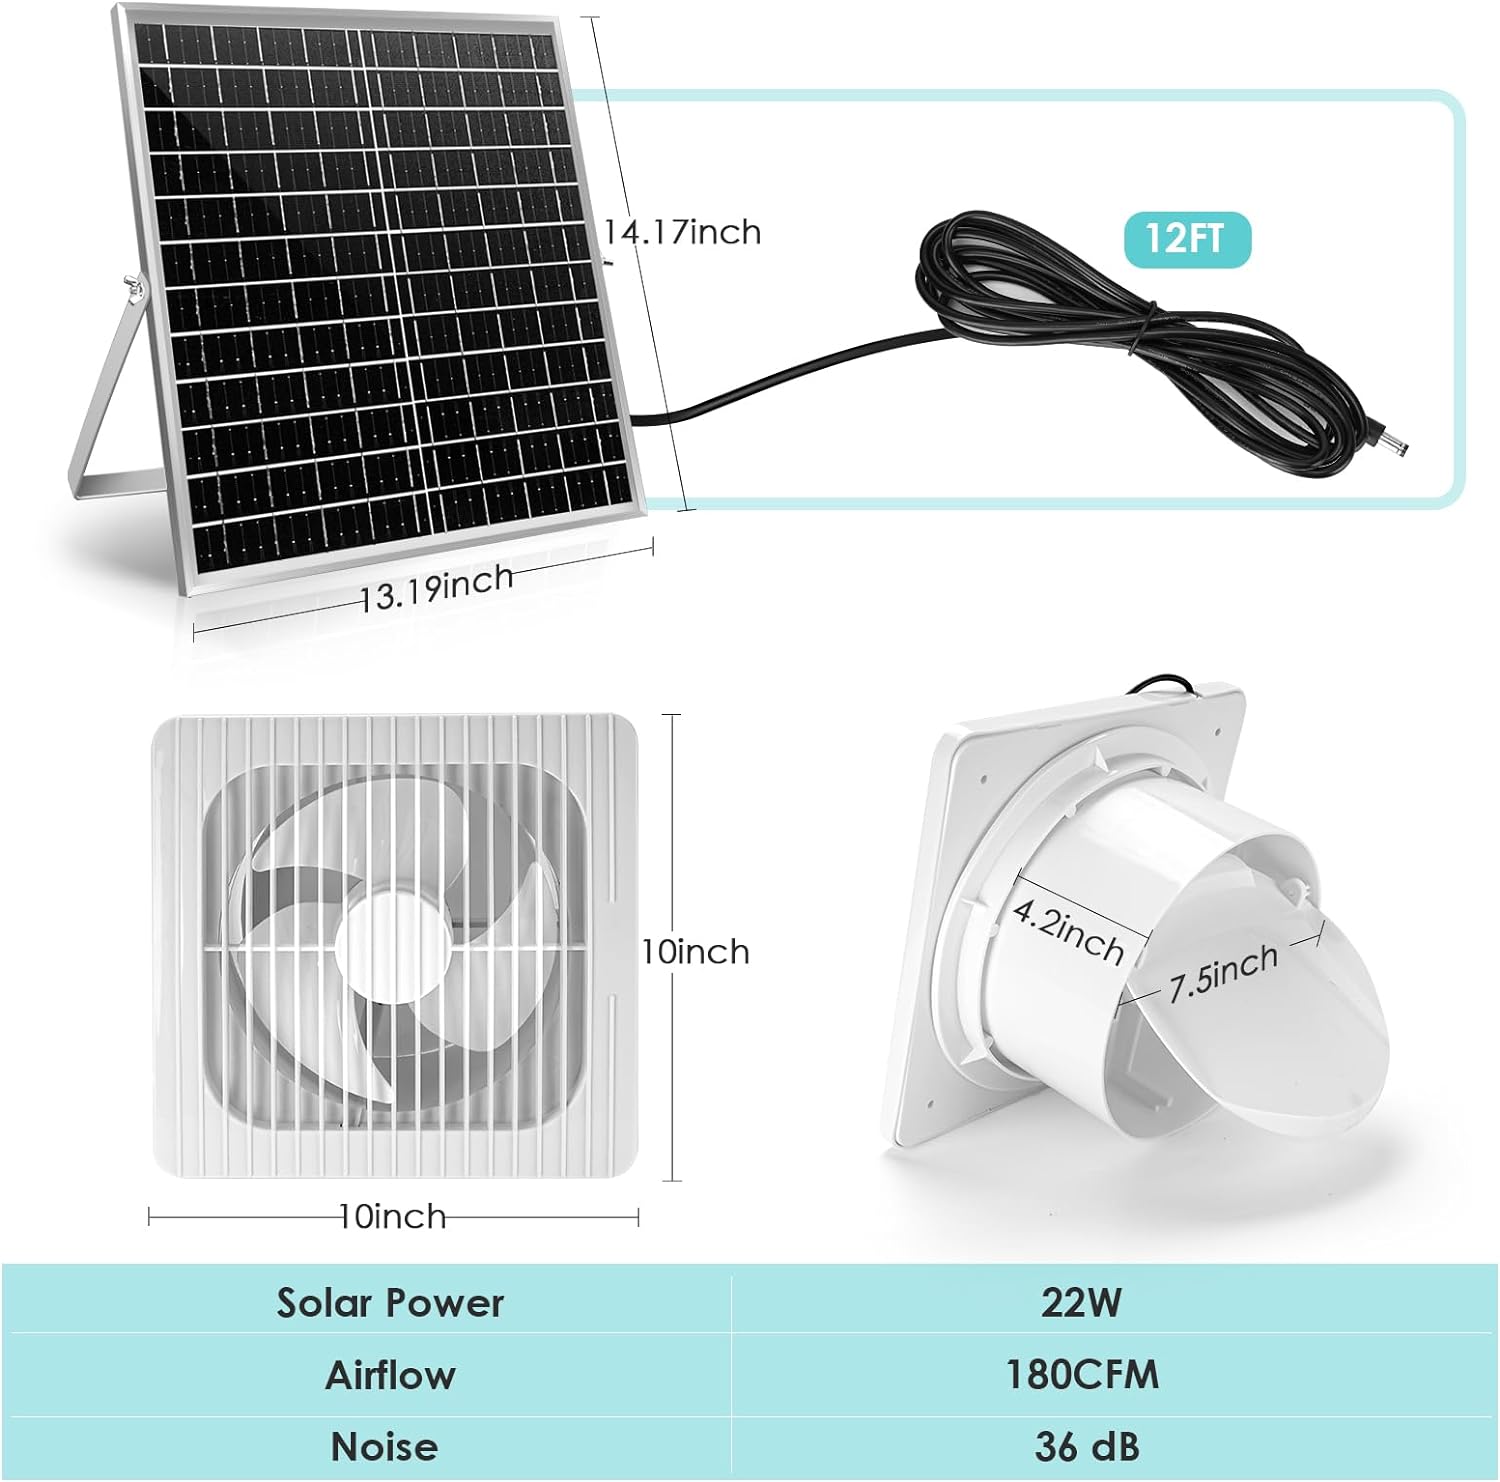 Solar Powered Exhaust Fan Review